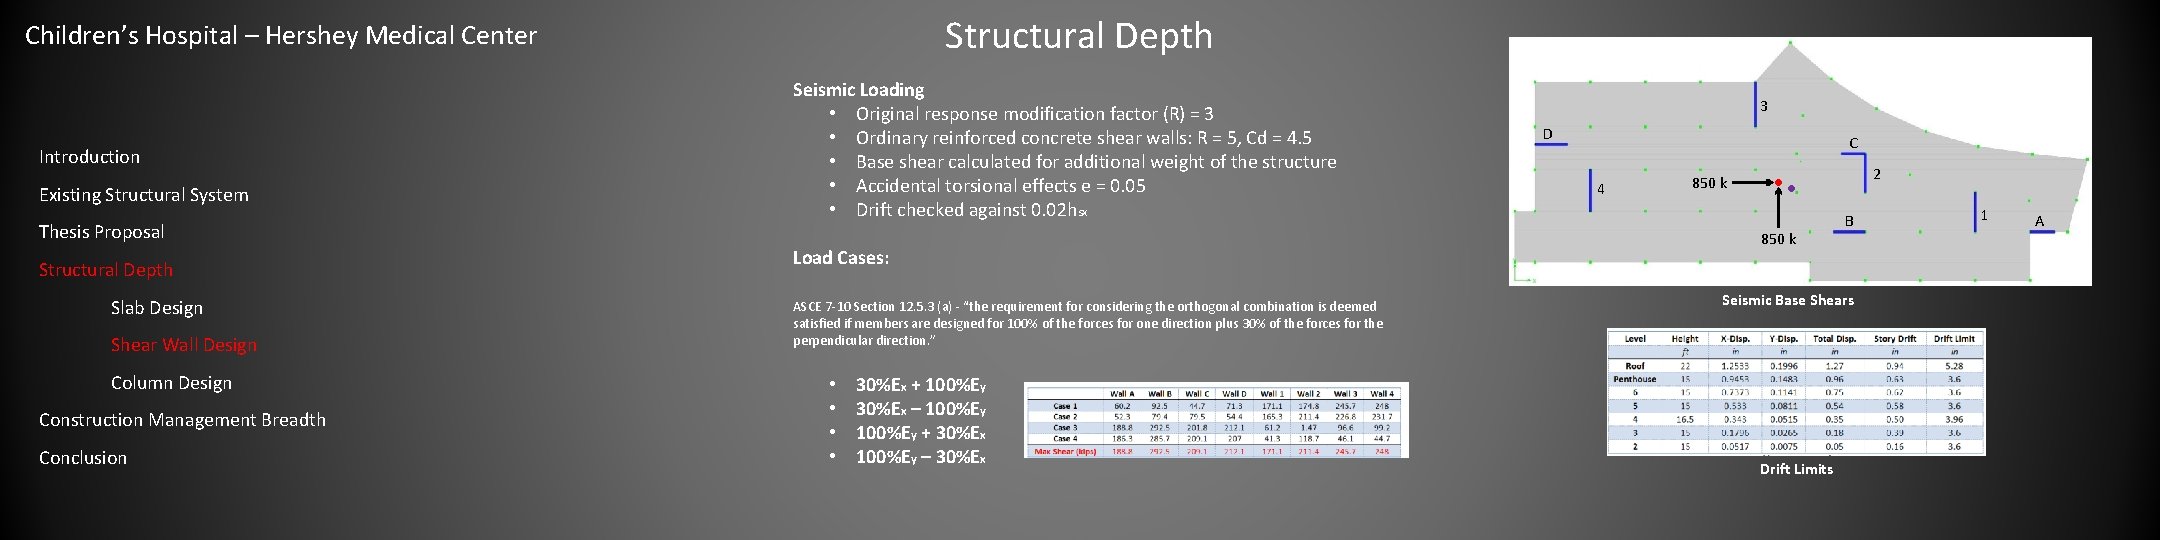 Structural Depth Children’s Hospital – Hershey Medical Center Introduction Existing Structural System Thesis Proposal